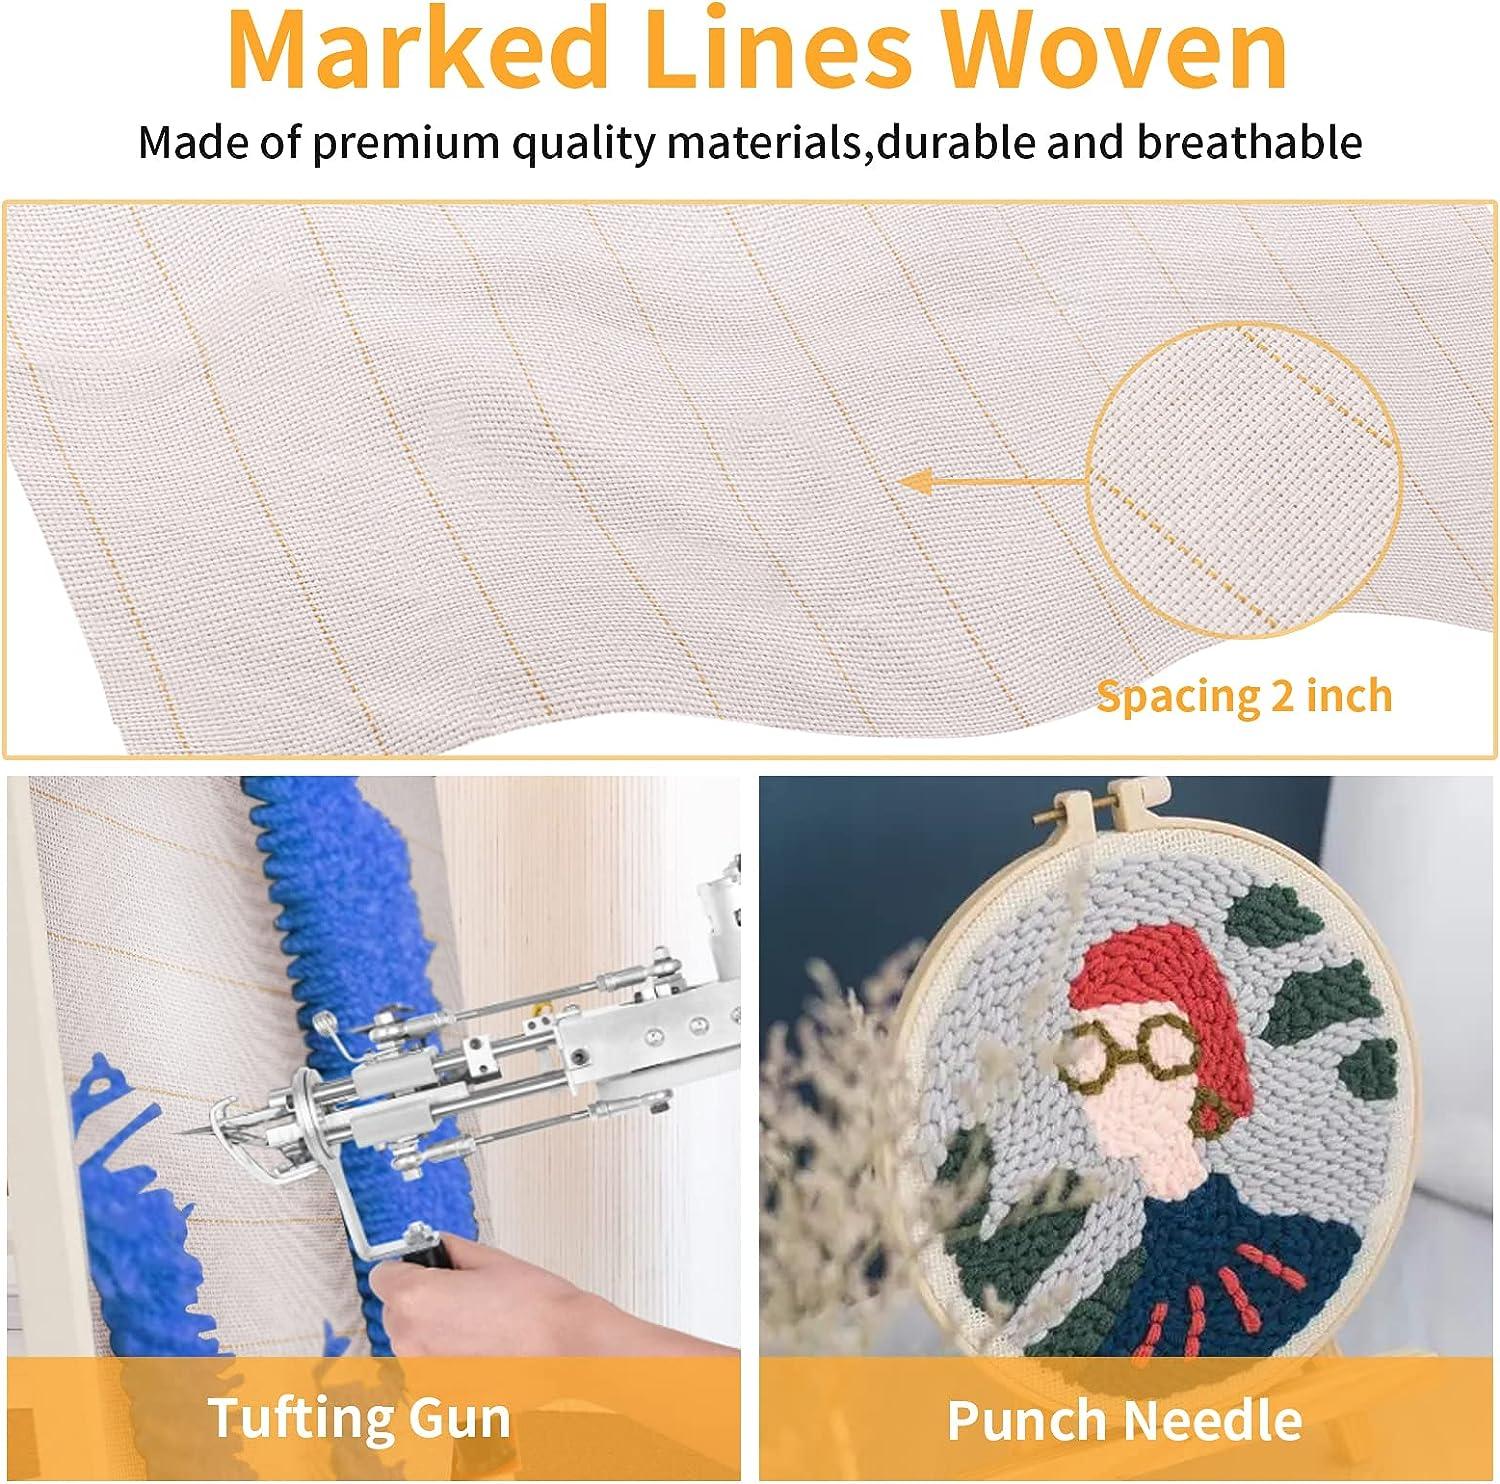  79 × 59 Large Overlocking Tufting Cloth with Marked Lines-  Primary Monk's Cloth Punch Needle Fabric for DIY Rug-Punch Tufting Gun :  Arts, Crafts & Sewing